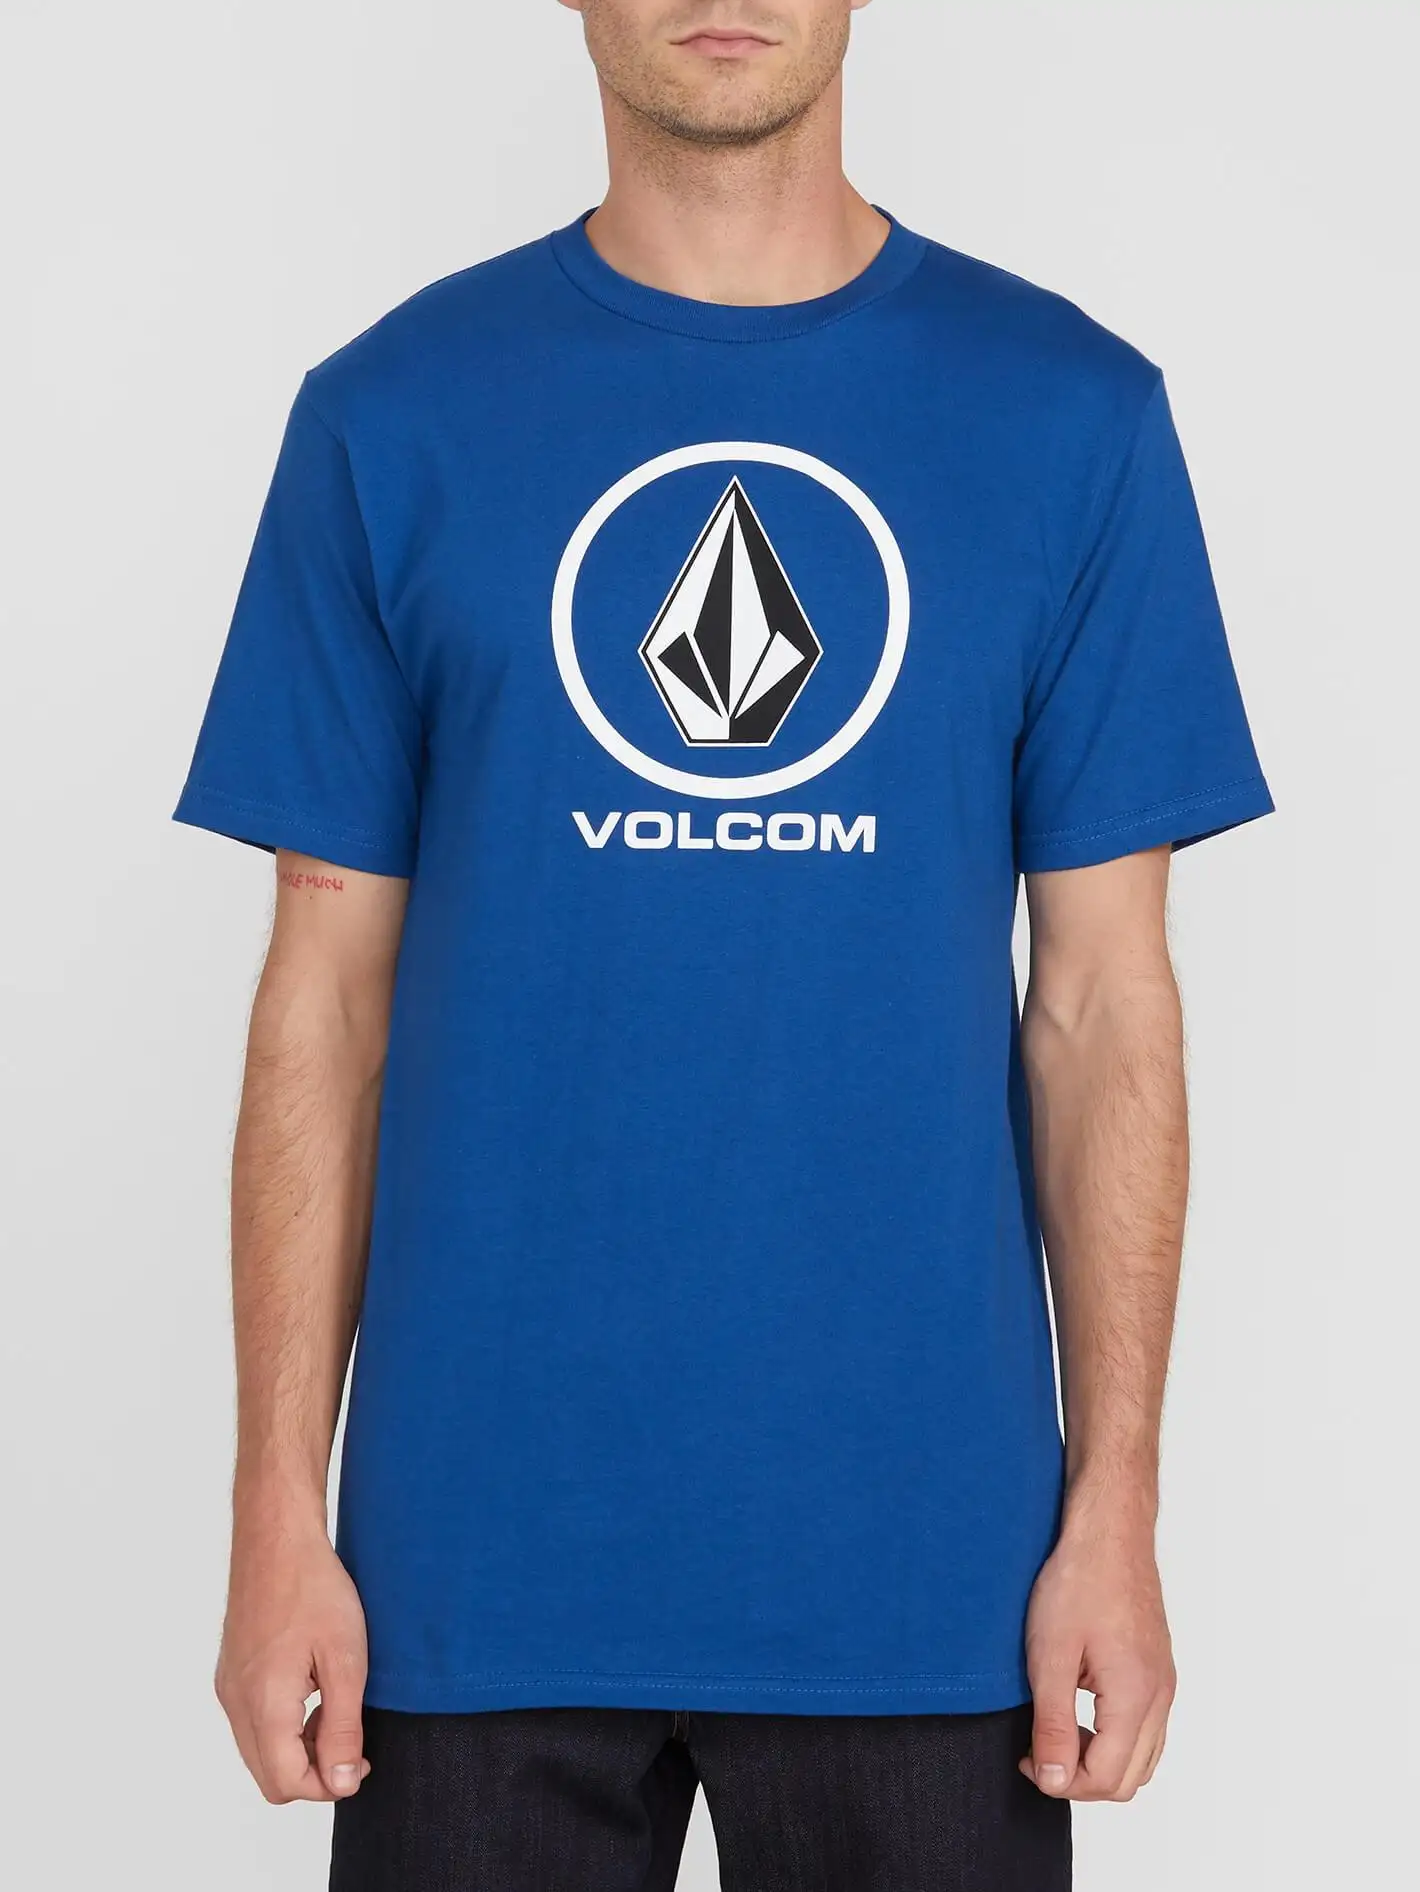 Volcom Coupon for Additional Savings Sitewide